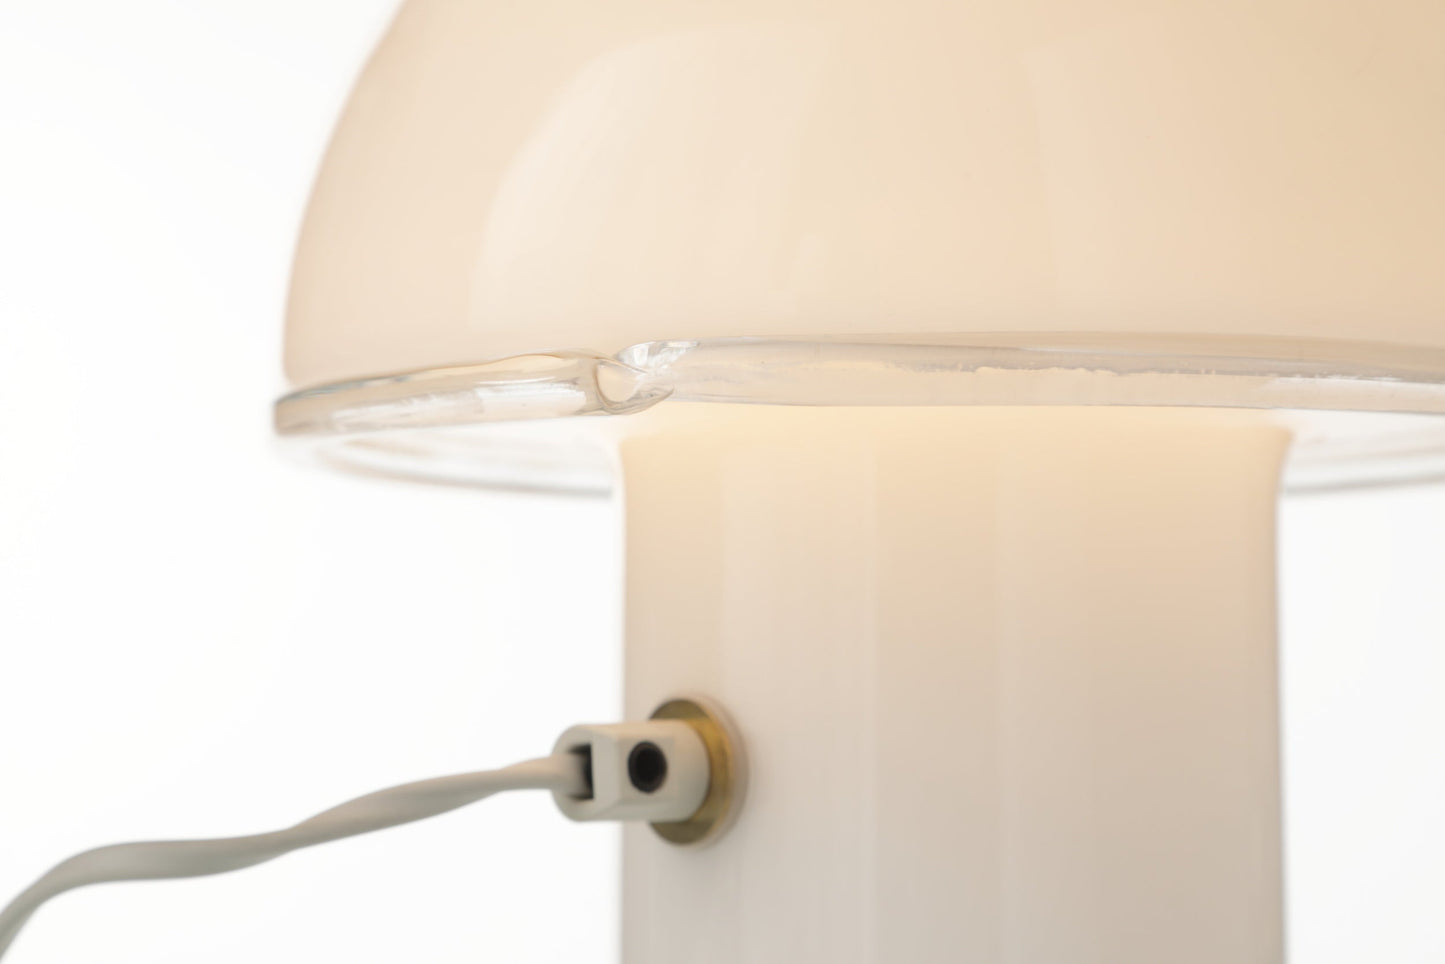 Onfale table lamp Luciano Vistosi for Artemide 1978